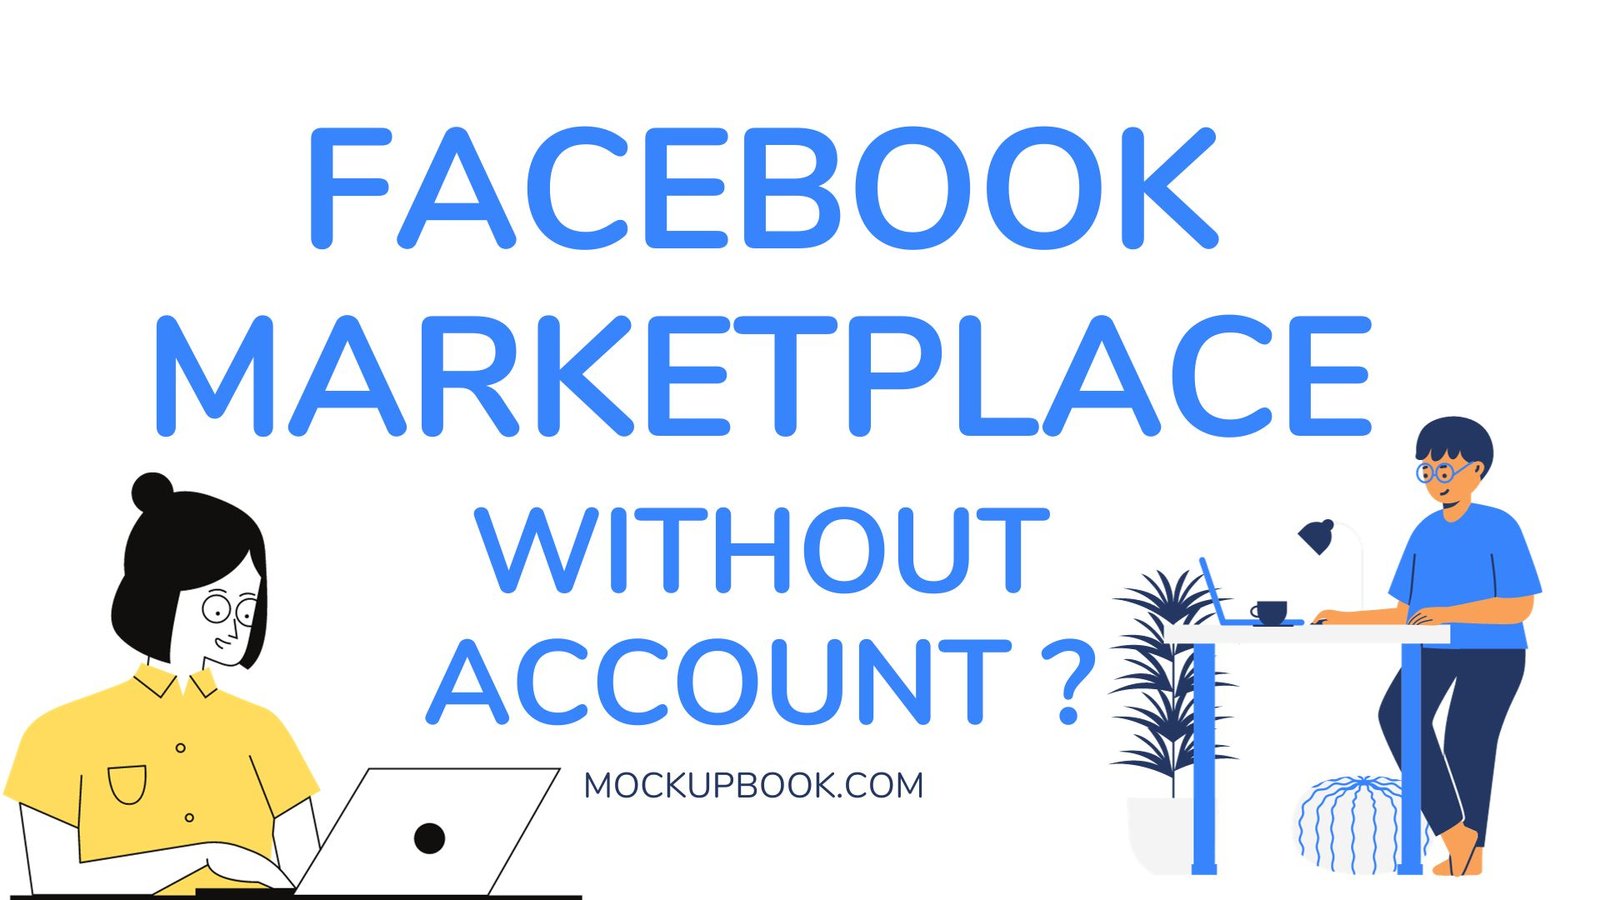 Use Facebook Marketplace Without a Facebook Account?